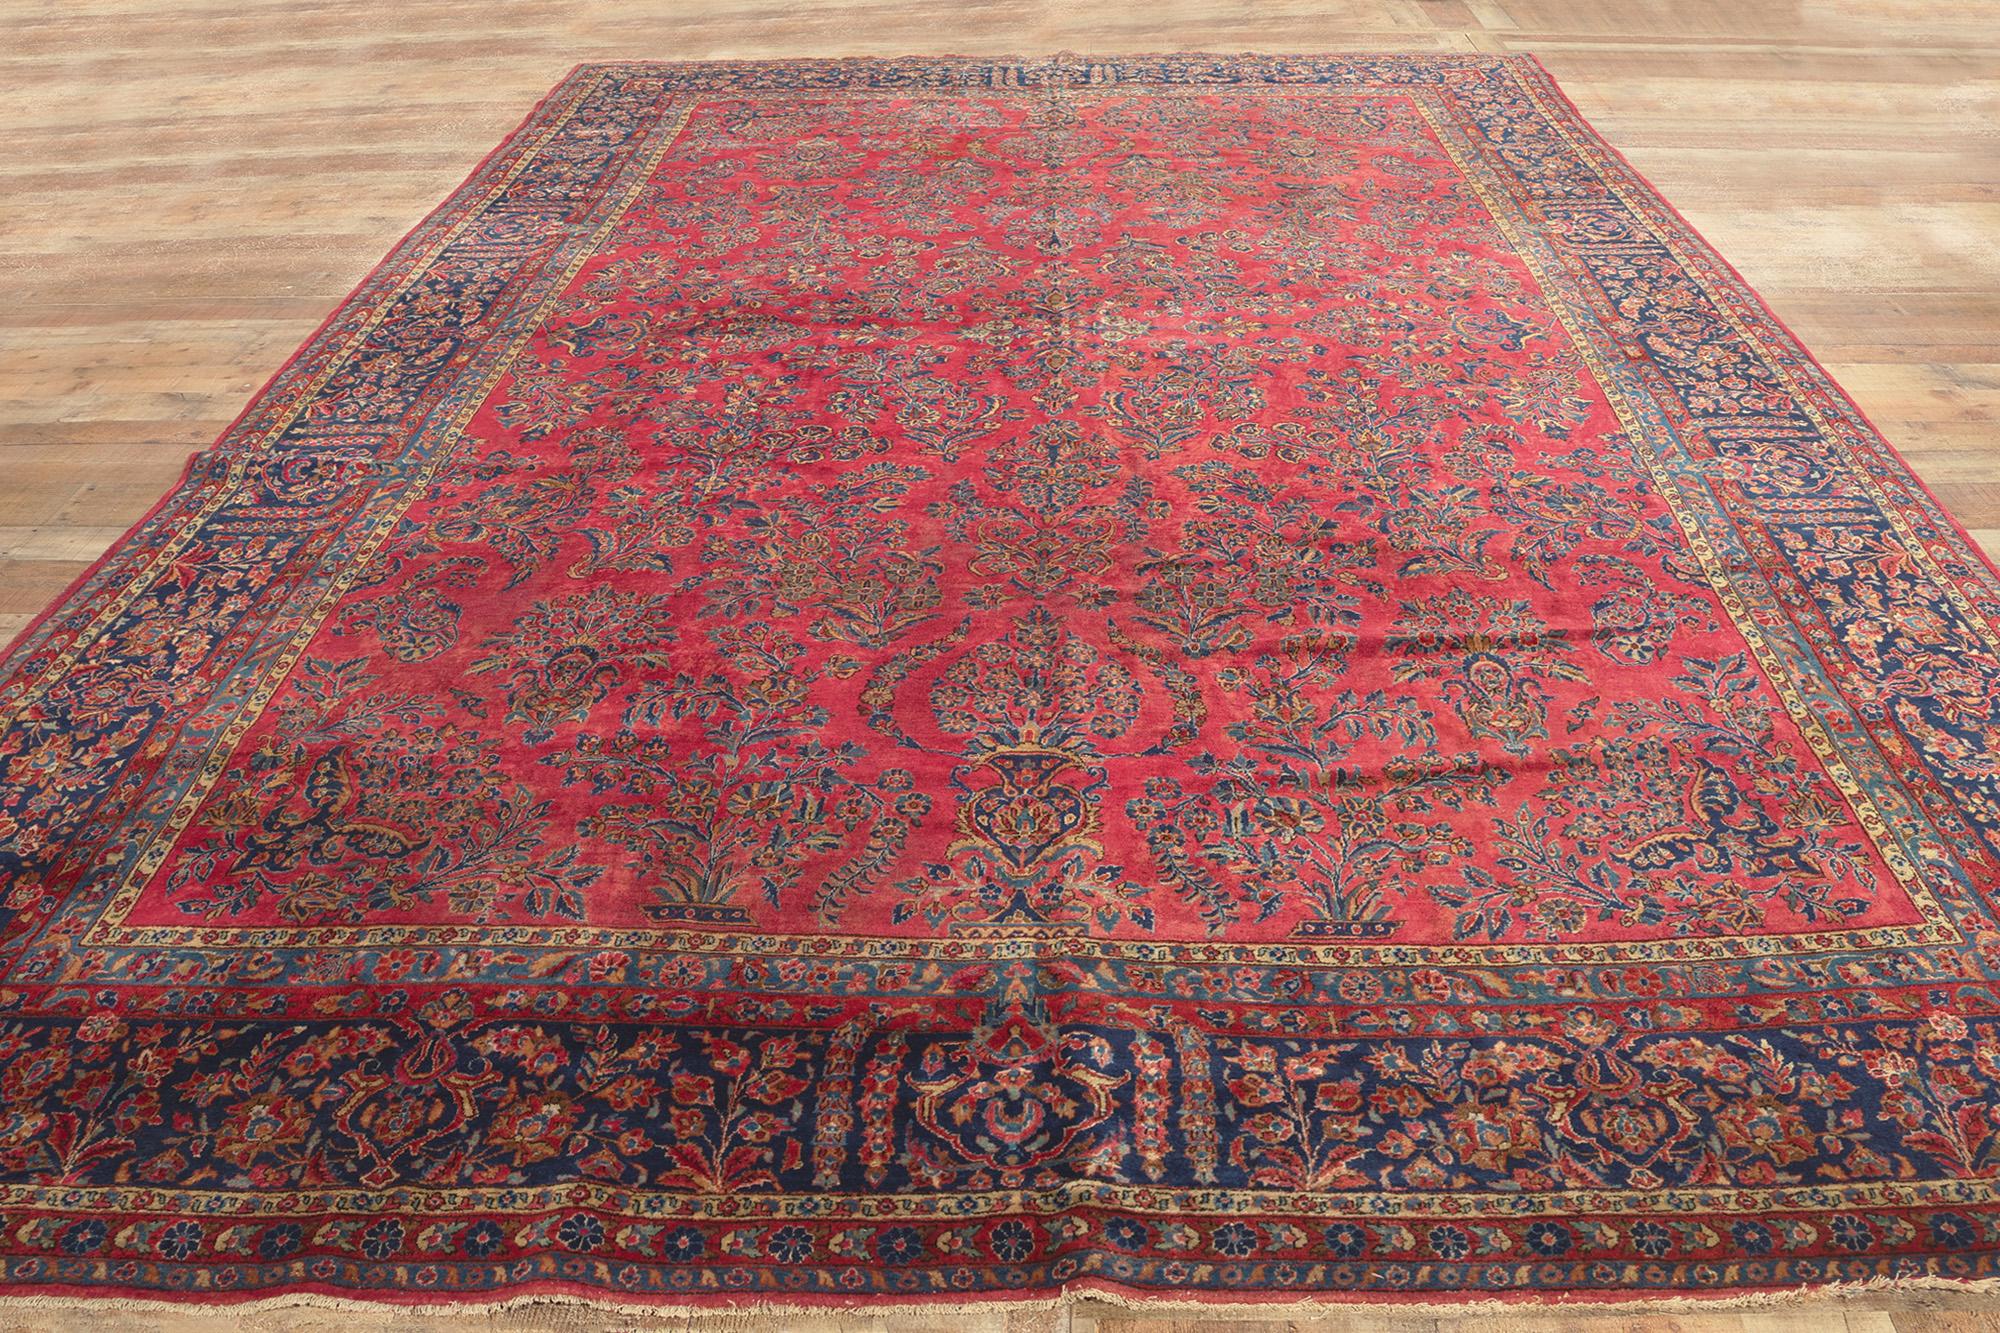 Antique Persian Kashan Rug with Art Nouveau Style in Rich Jewel Tones 6